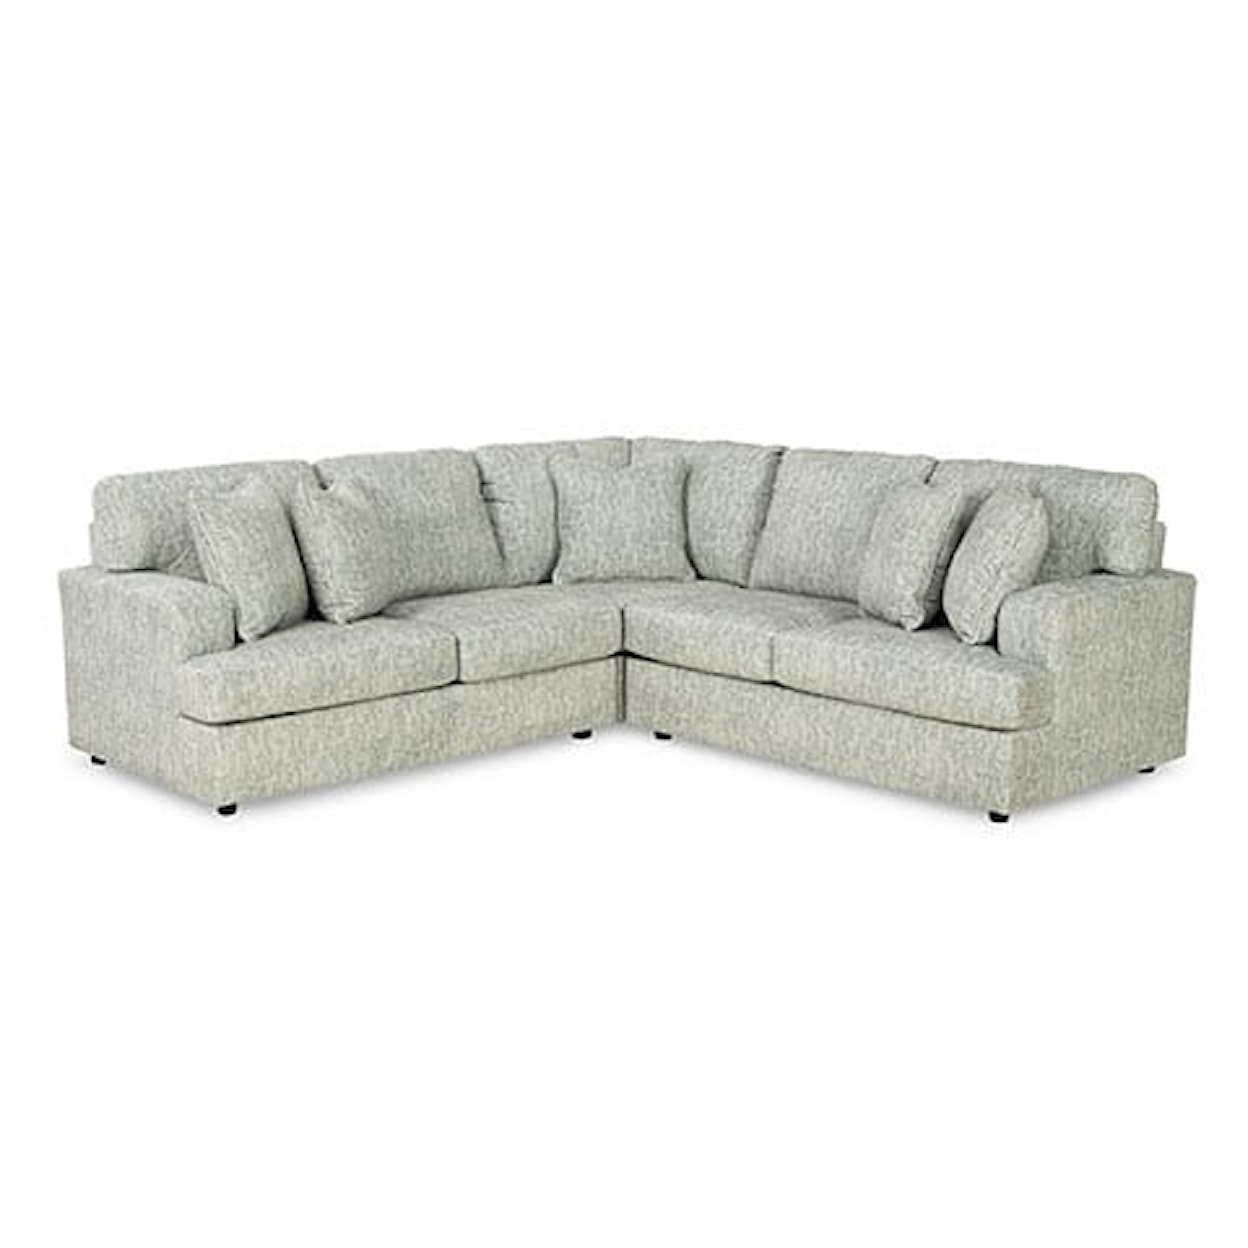 Benchcraft Playwrite Sectional Sofa